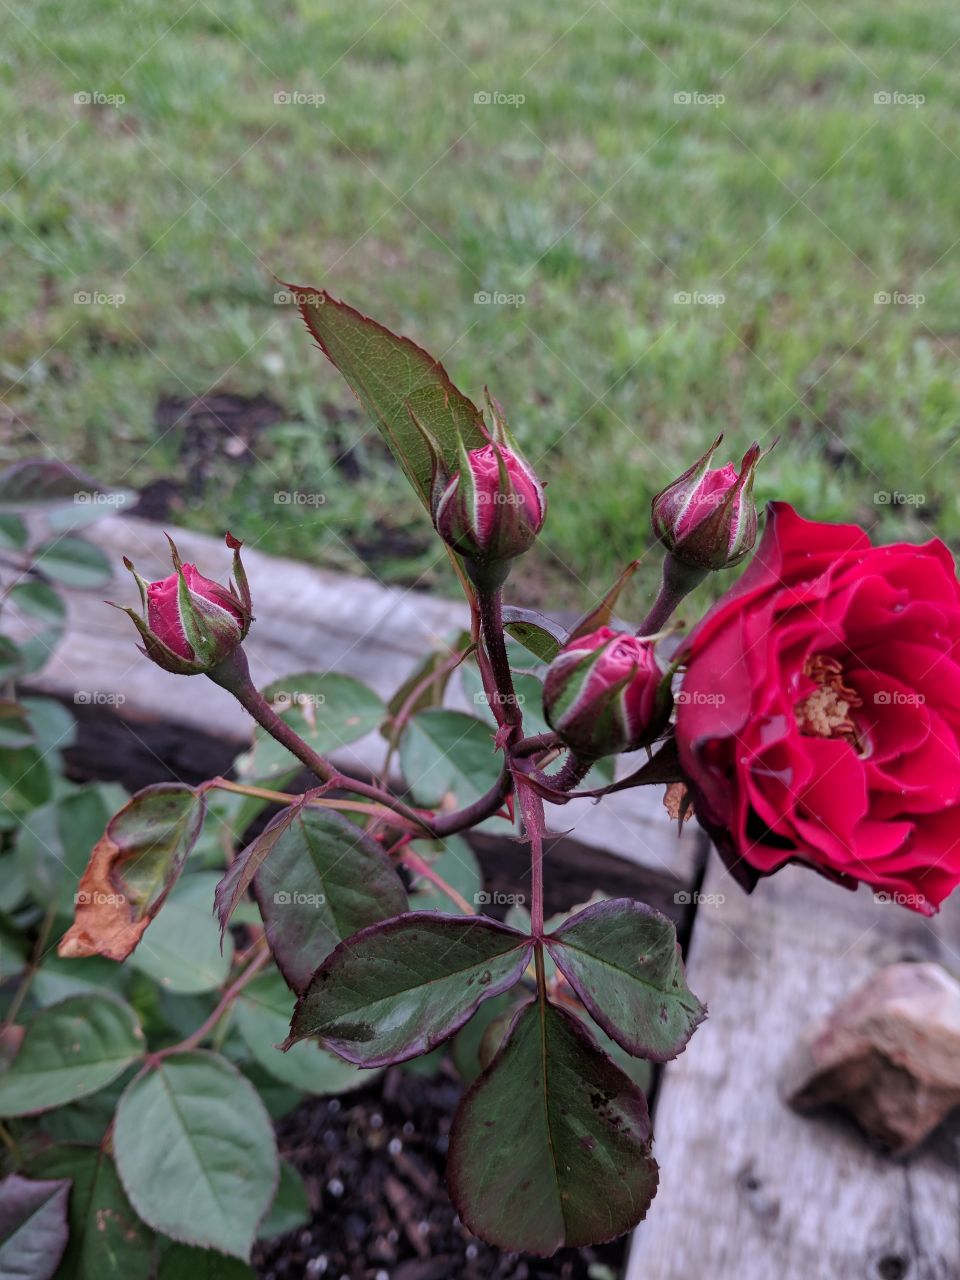 red rose bloom with buds